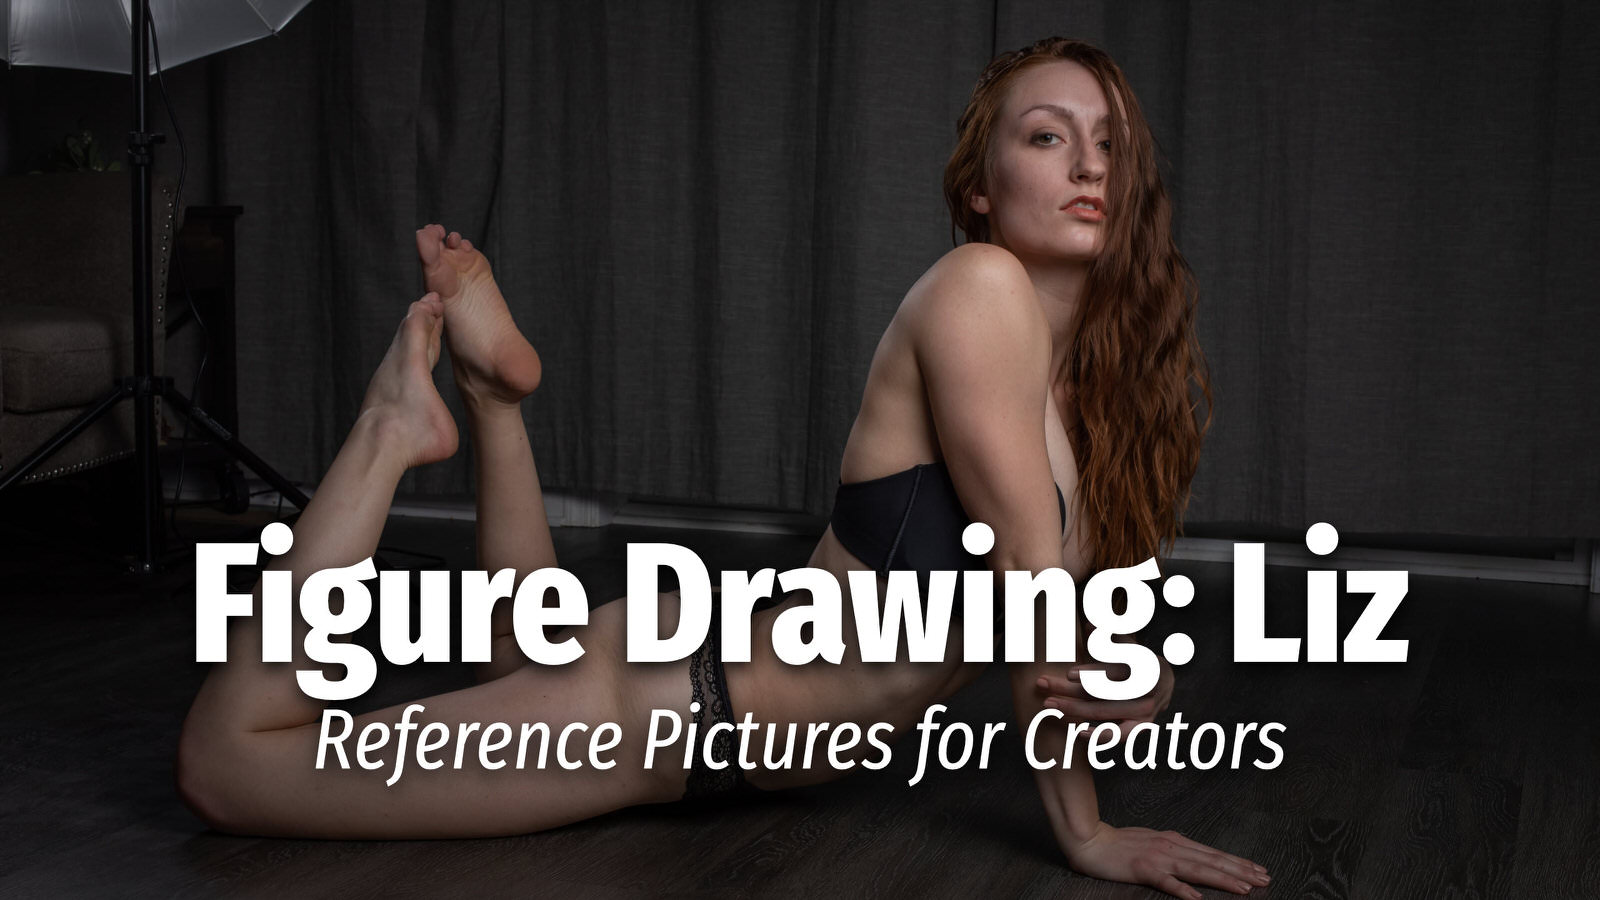 ArtStation - Female Figure Drawing - Vol 16 - Reference Pictures | Resources